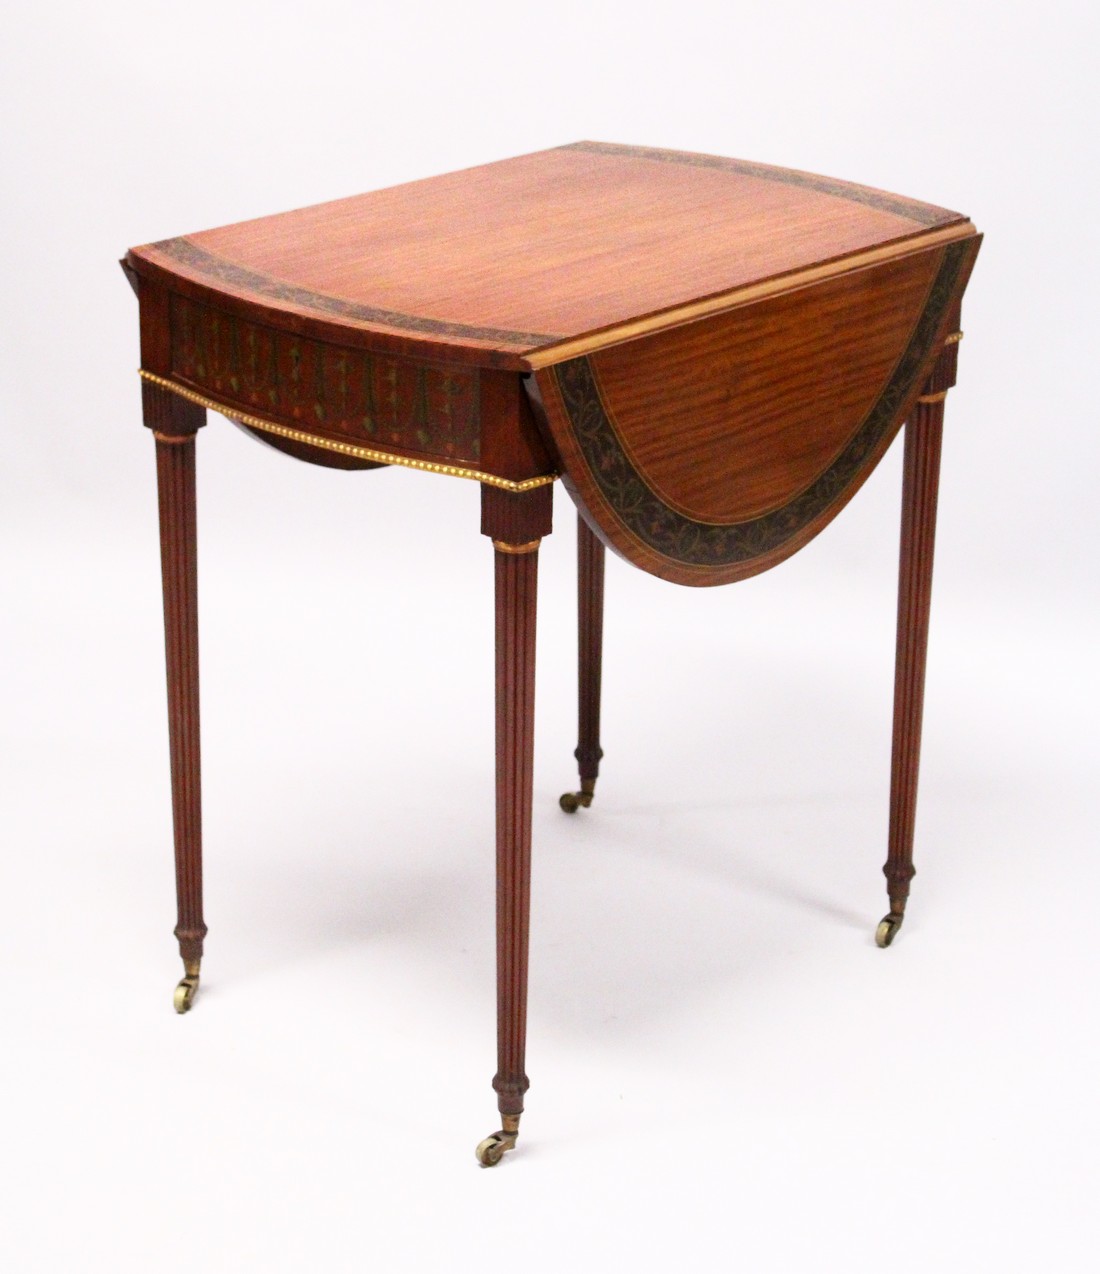 A VERY GOOD EDWARDIAN MAHOGANY AND PAINTED PEMBROOKE TABLE, PROBABLY GILLOW, the oval top painted